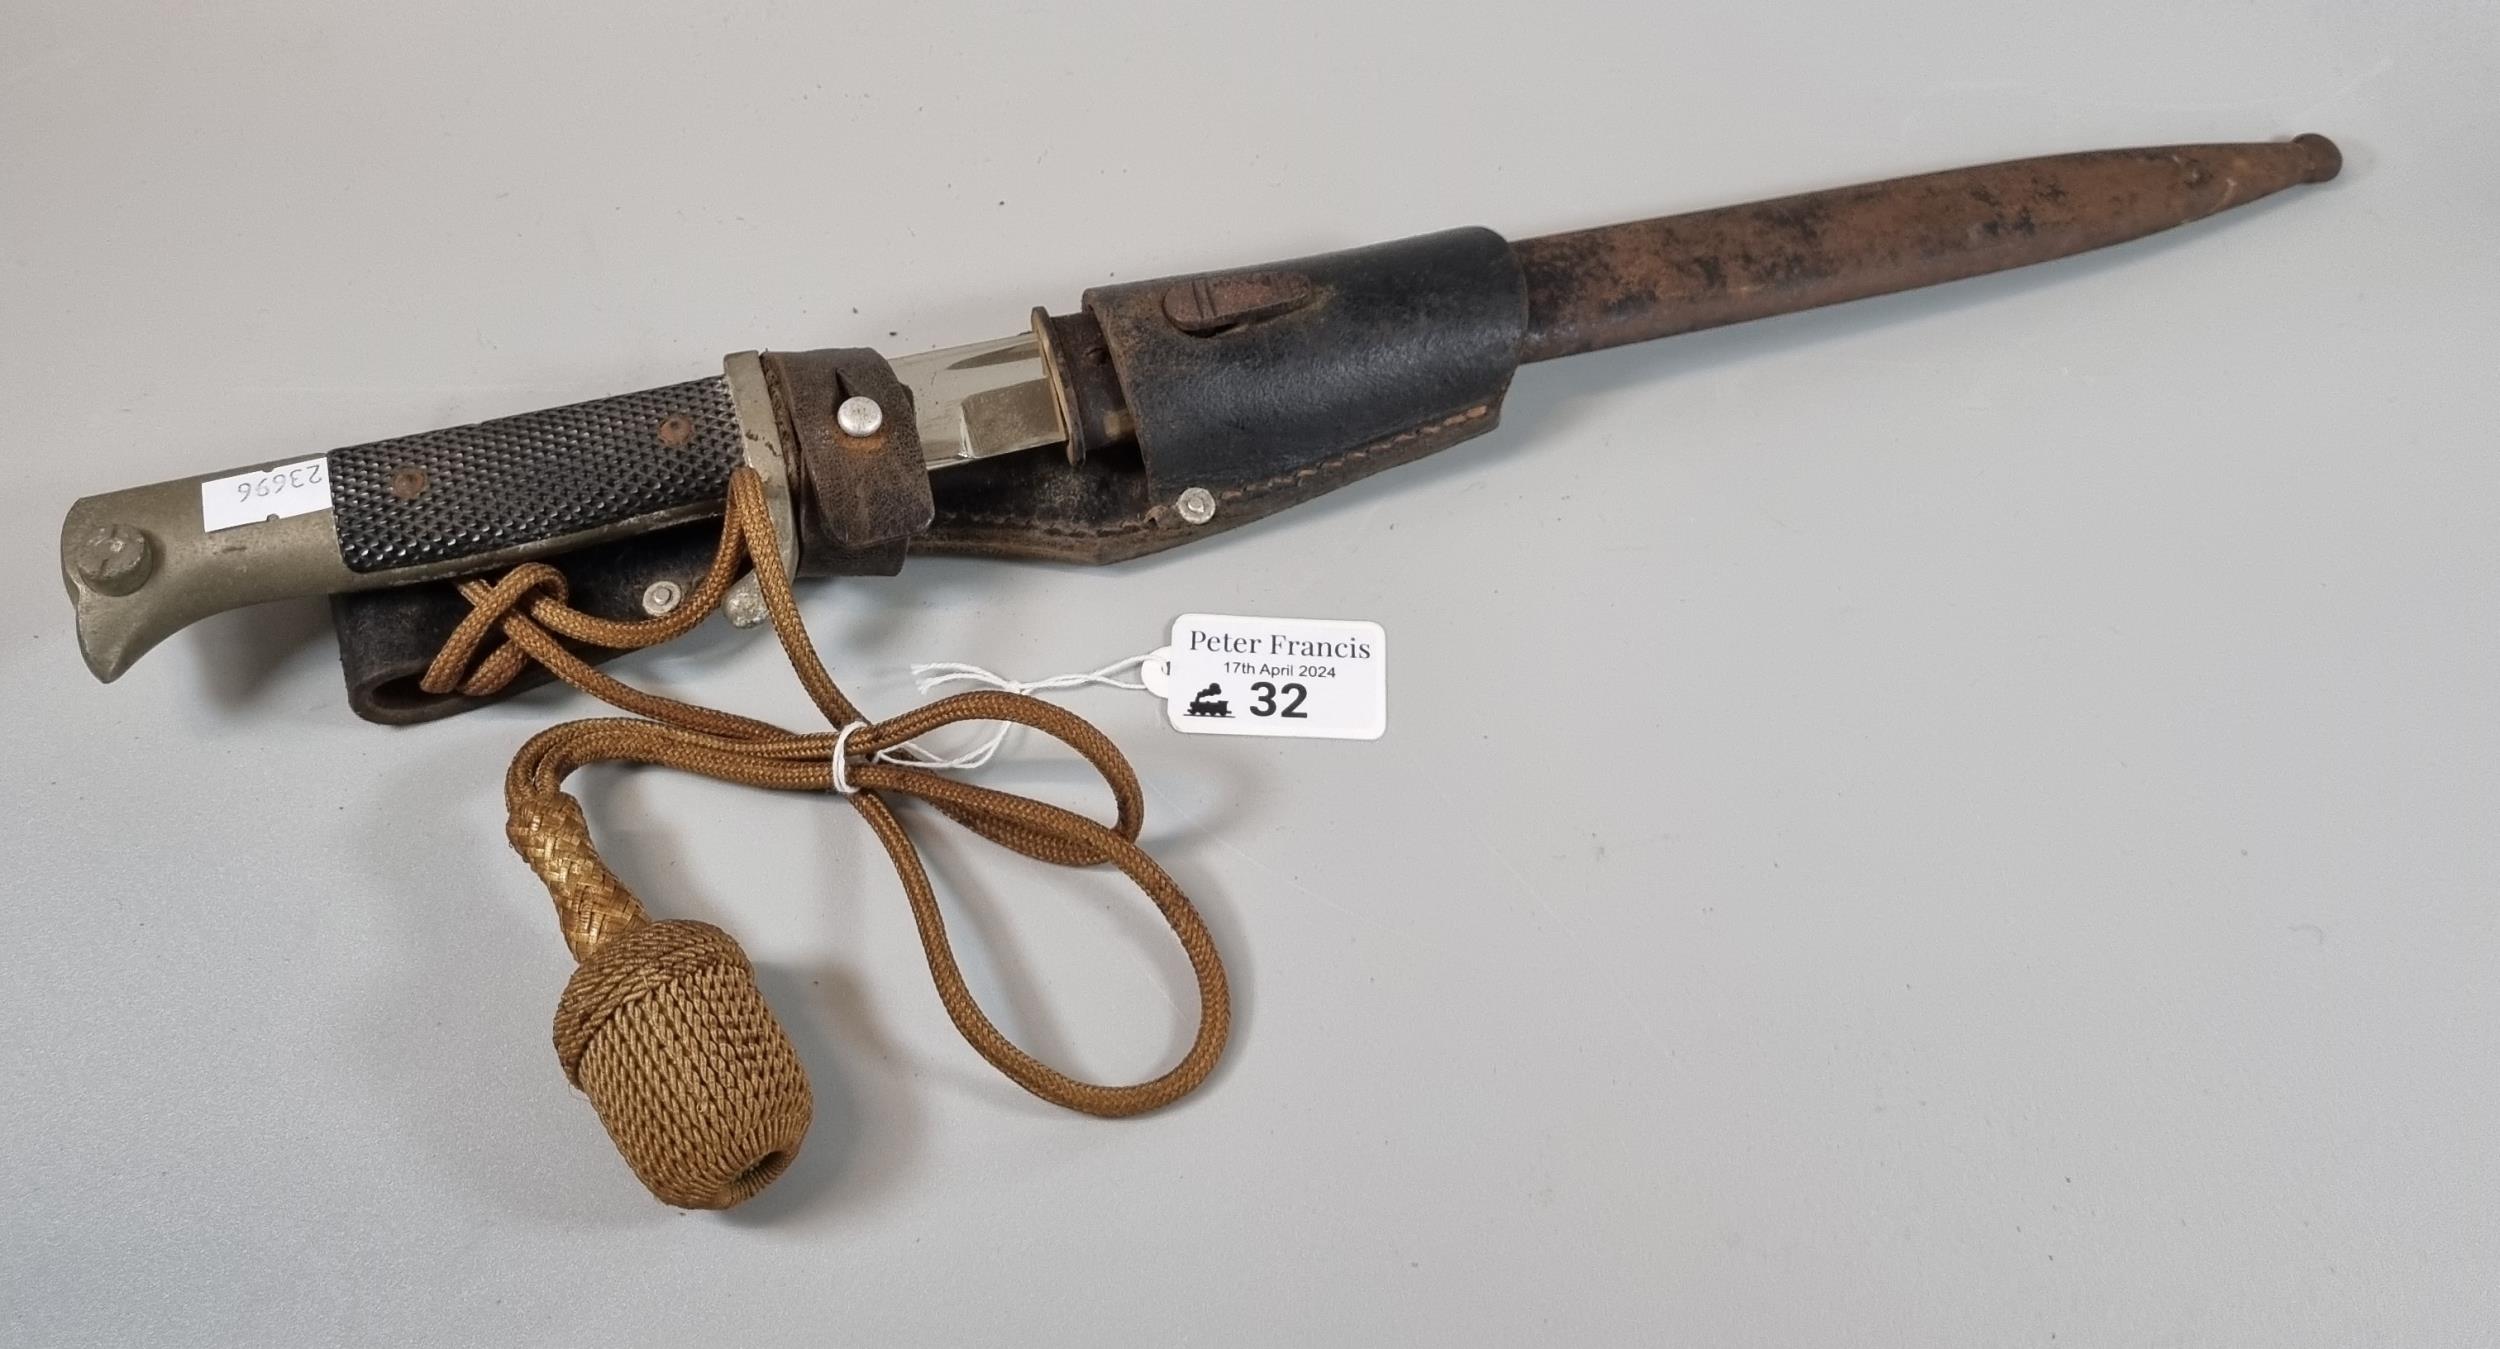 German Solingen bayonet with metal scabbard, leather frog and associated tassel. (B.P. 21% + VAT)